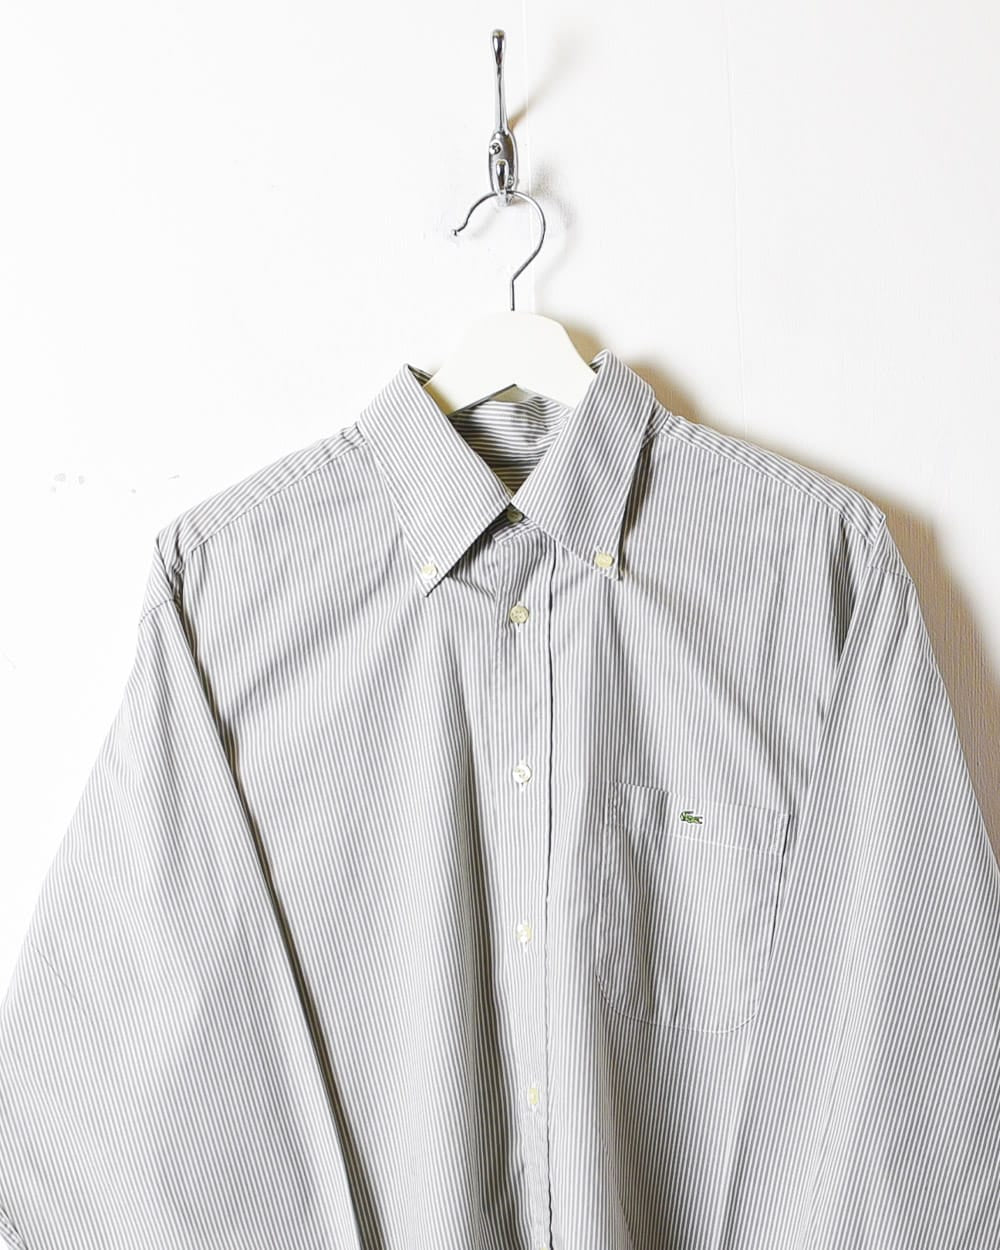 Grey Lacoste Striped Shirt - X-Large